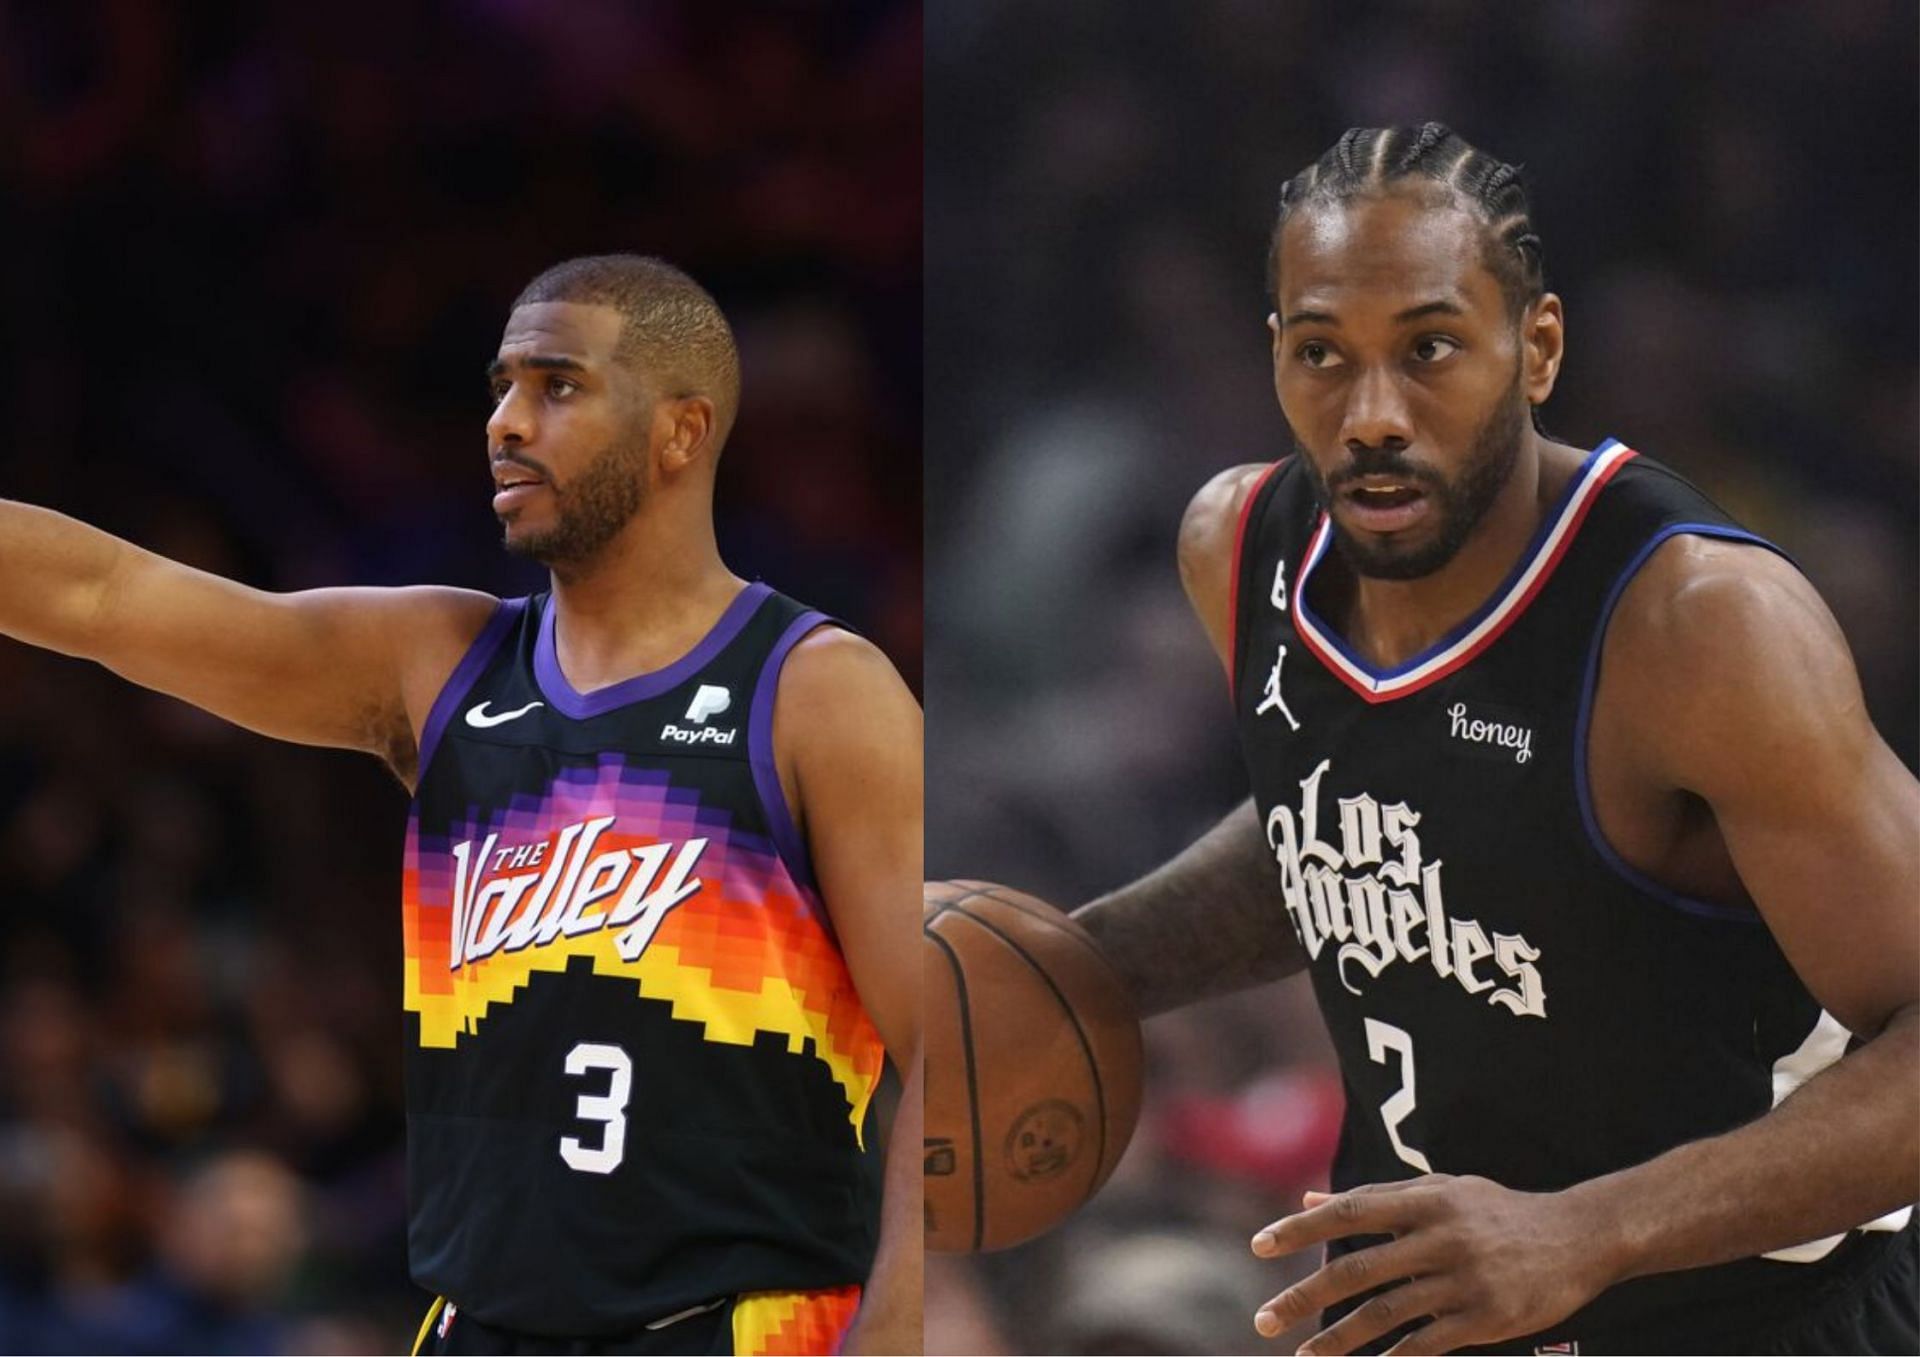 Chris Paul and Kawhi Leonard bumped but did not recognize each other after the Phoenix Suns